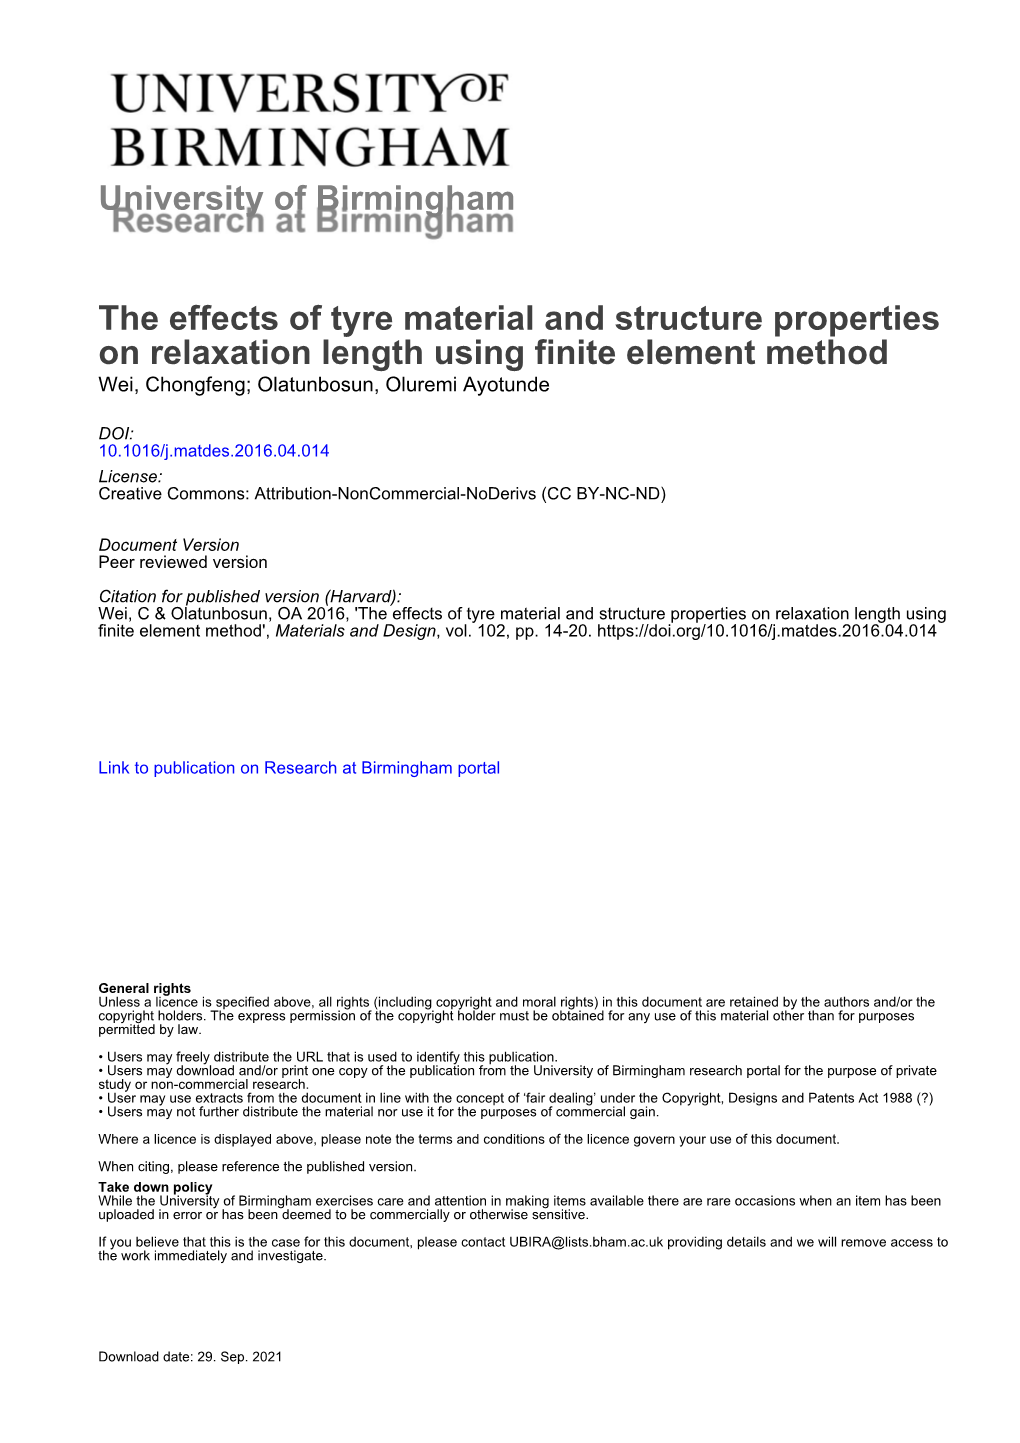 The Effects of Tyre Material and Structure Properties on Relaxation Length Using Finite Element Method Wei, Chongfeng; Olatunbosun, Oluremi Ayotunde